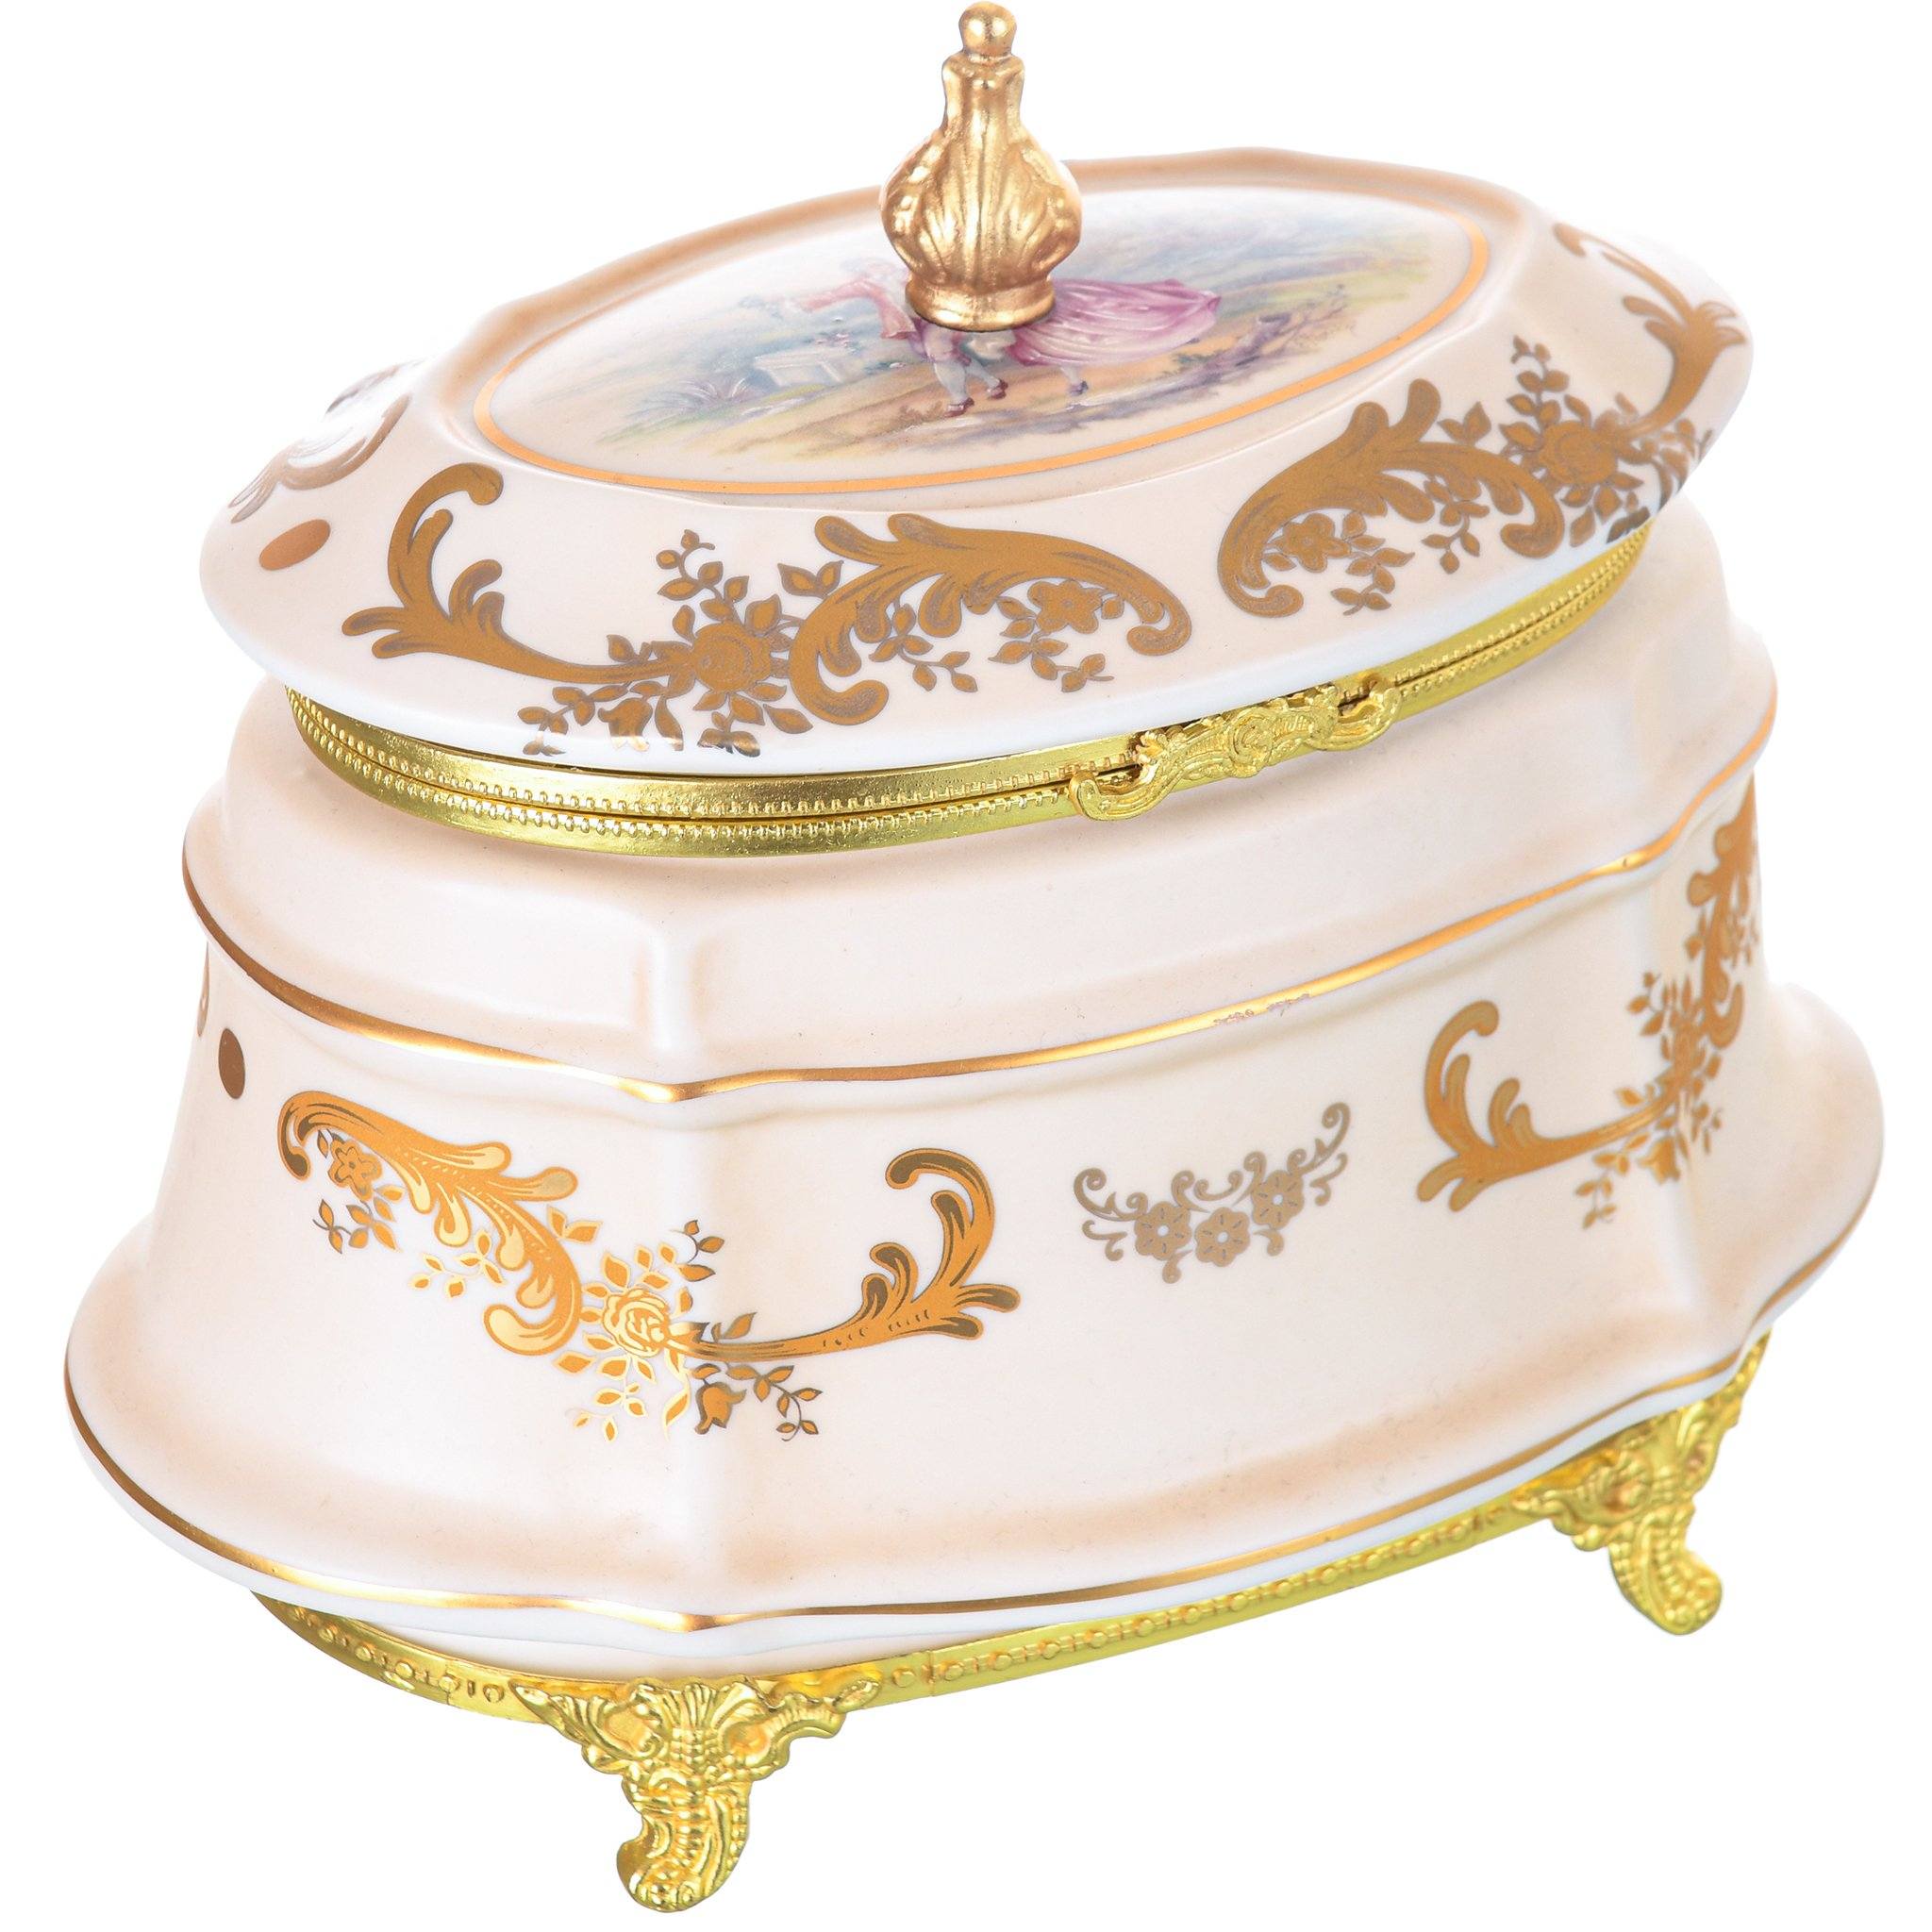 Caroline - Oval Box with Cover - Romeo & Juliet - Beige & Gold - 14x21cm - 58000567